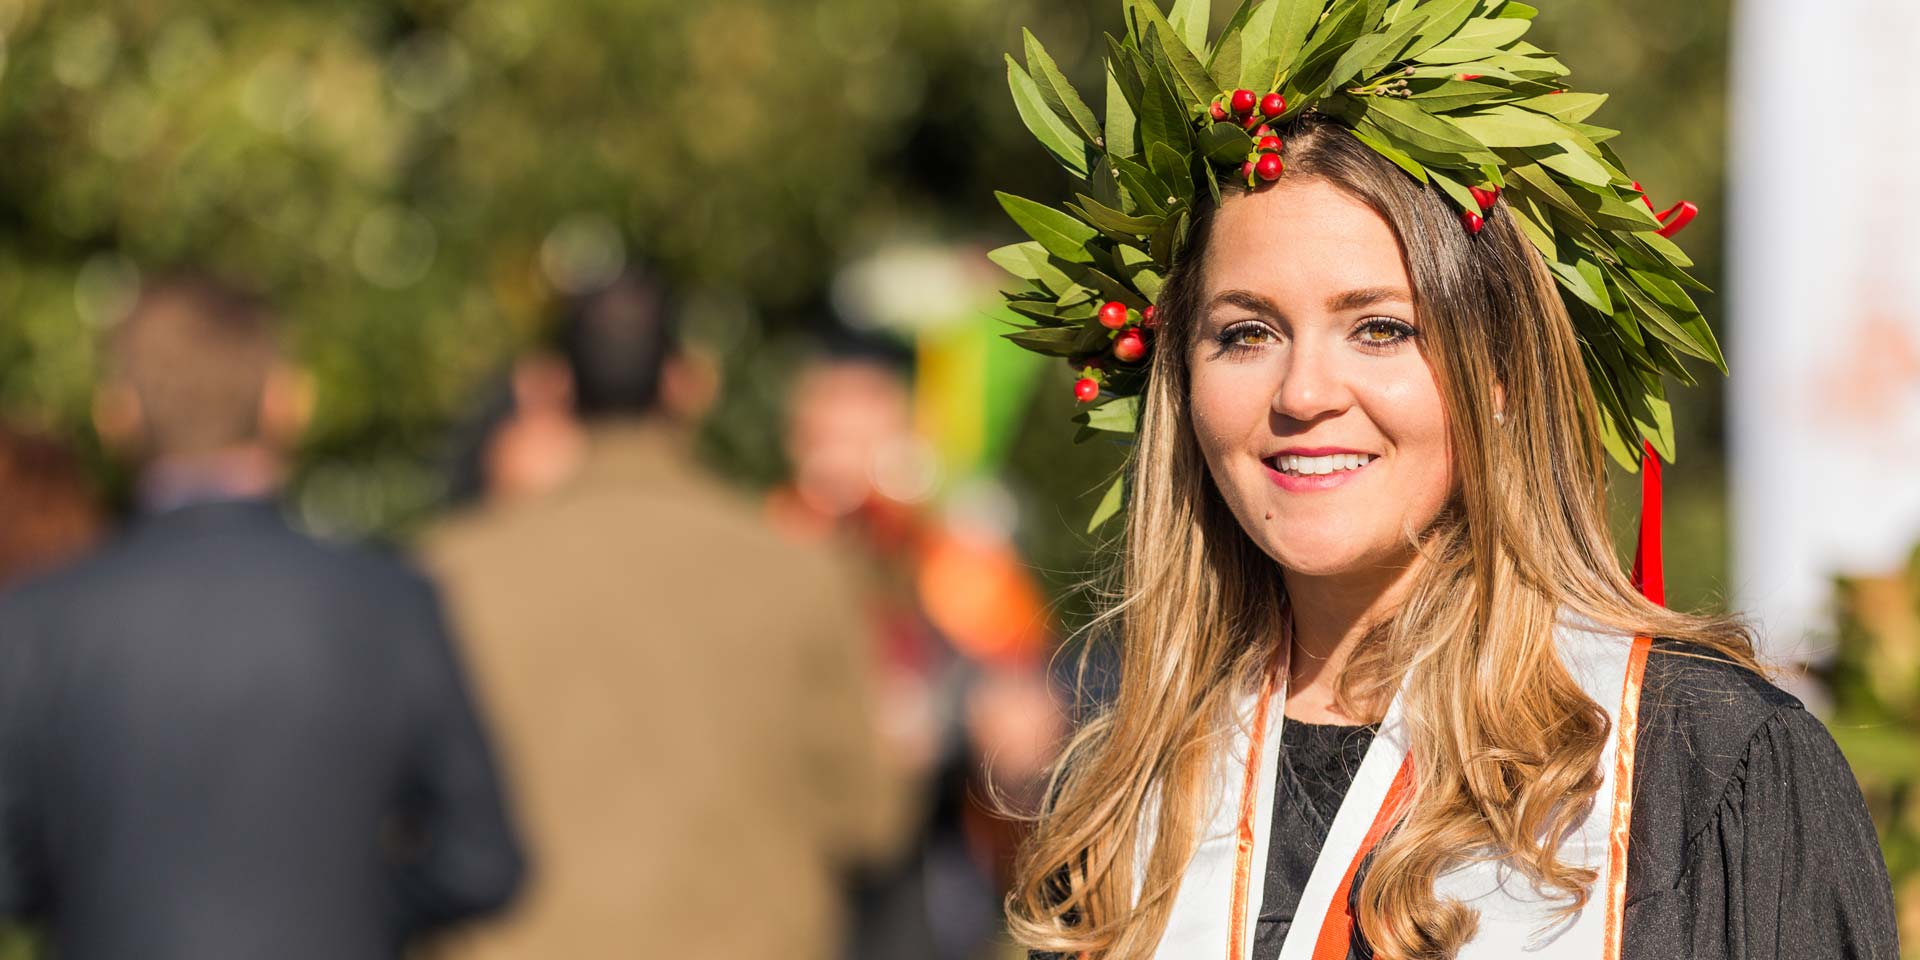 Marketing graduate Chiara Zamboni donned a headpiece with special meaning in her home country of Italy. The crown made of bay leaves and berries represents victory and success.